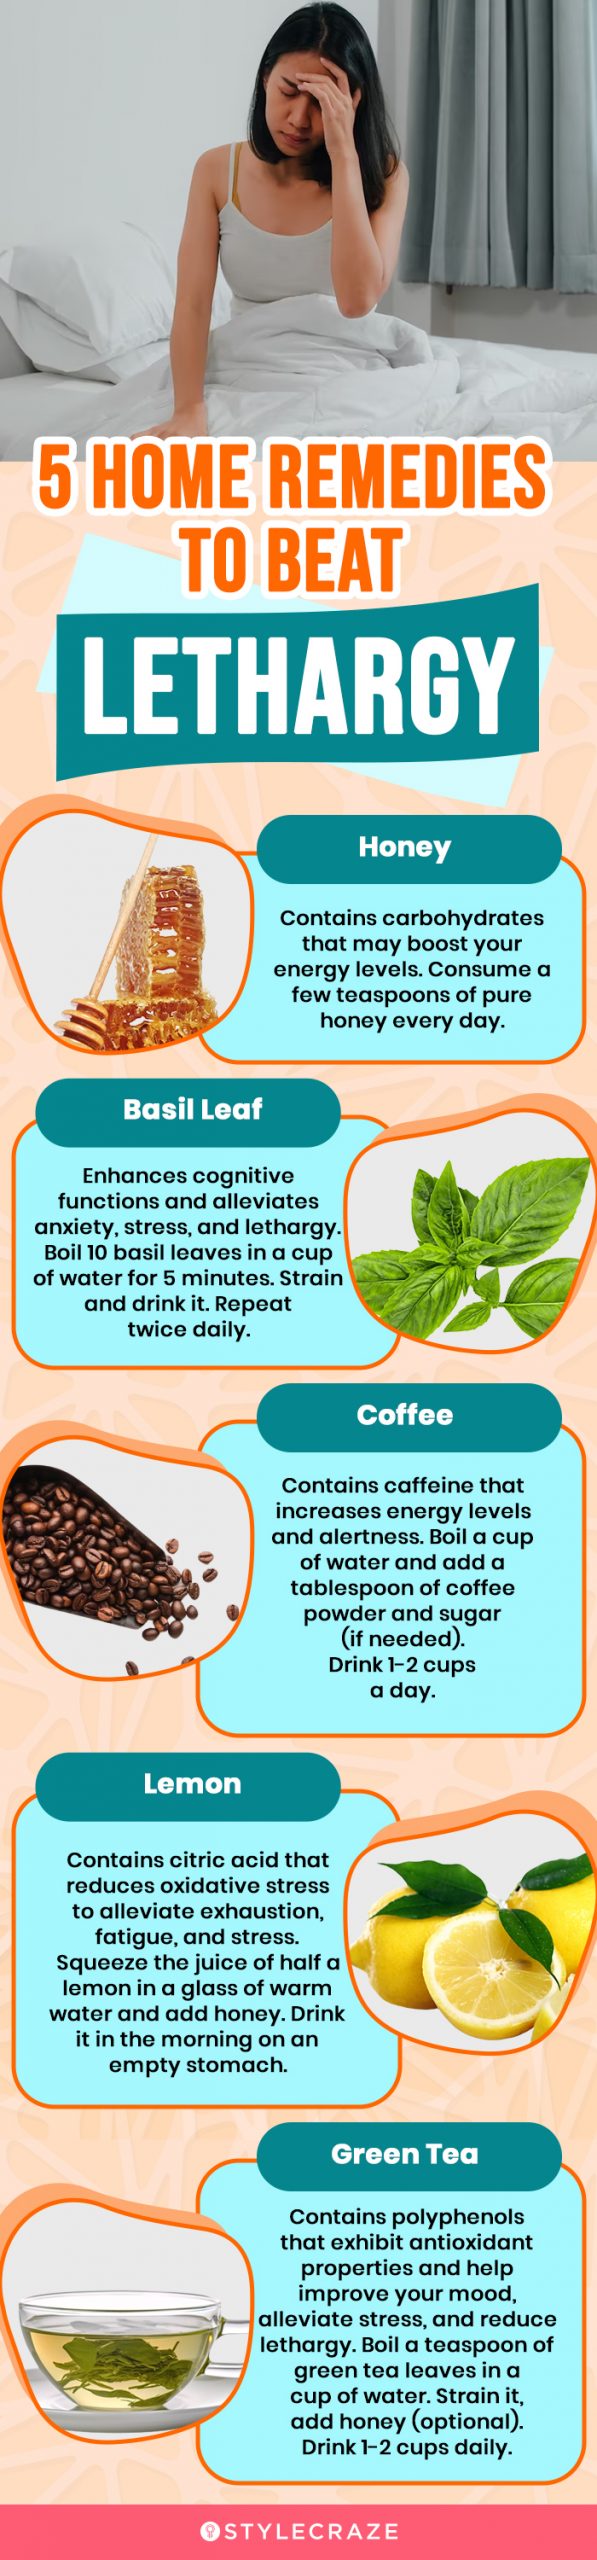 5 home remedies to beat lethargy (infographic)